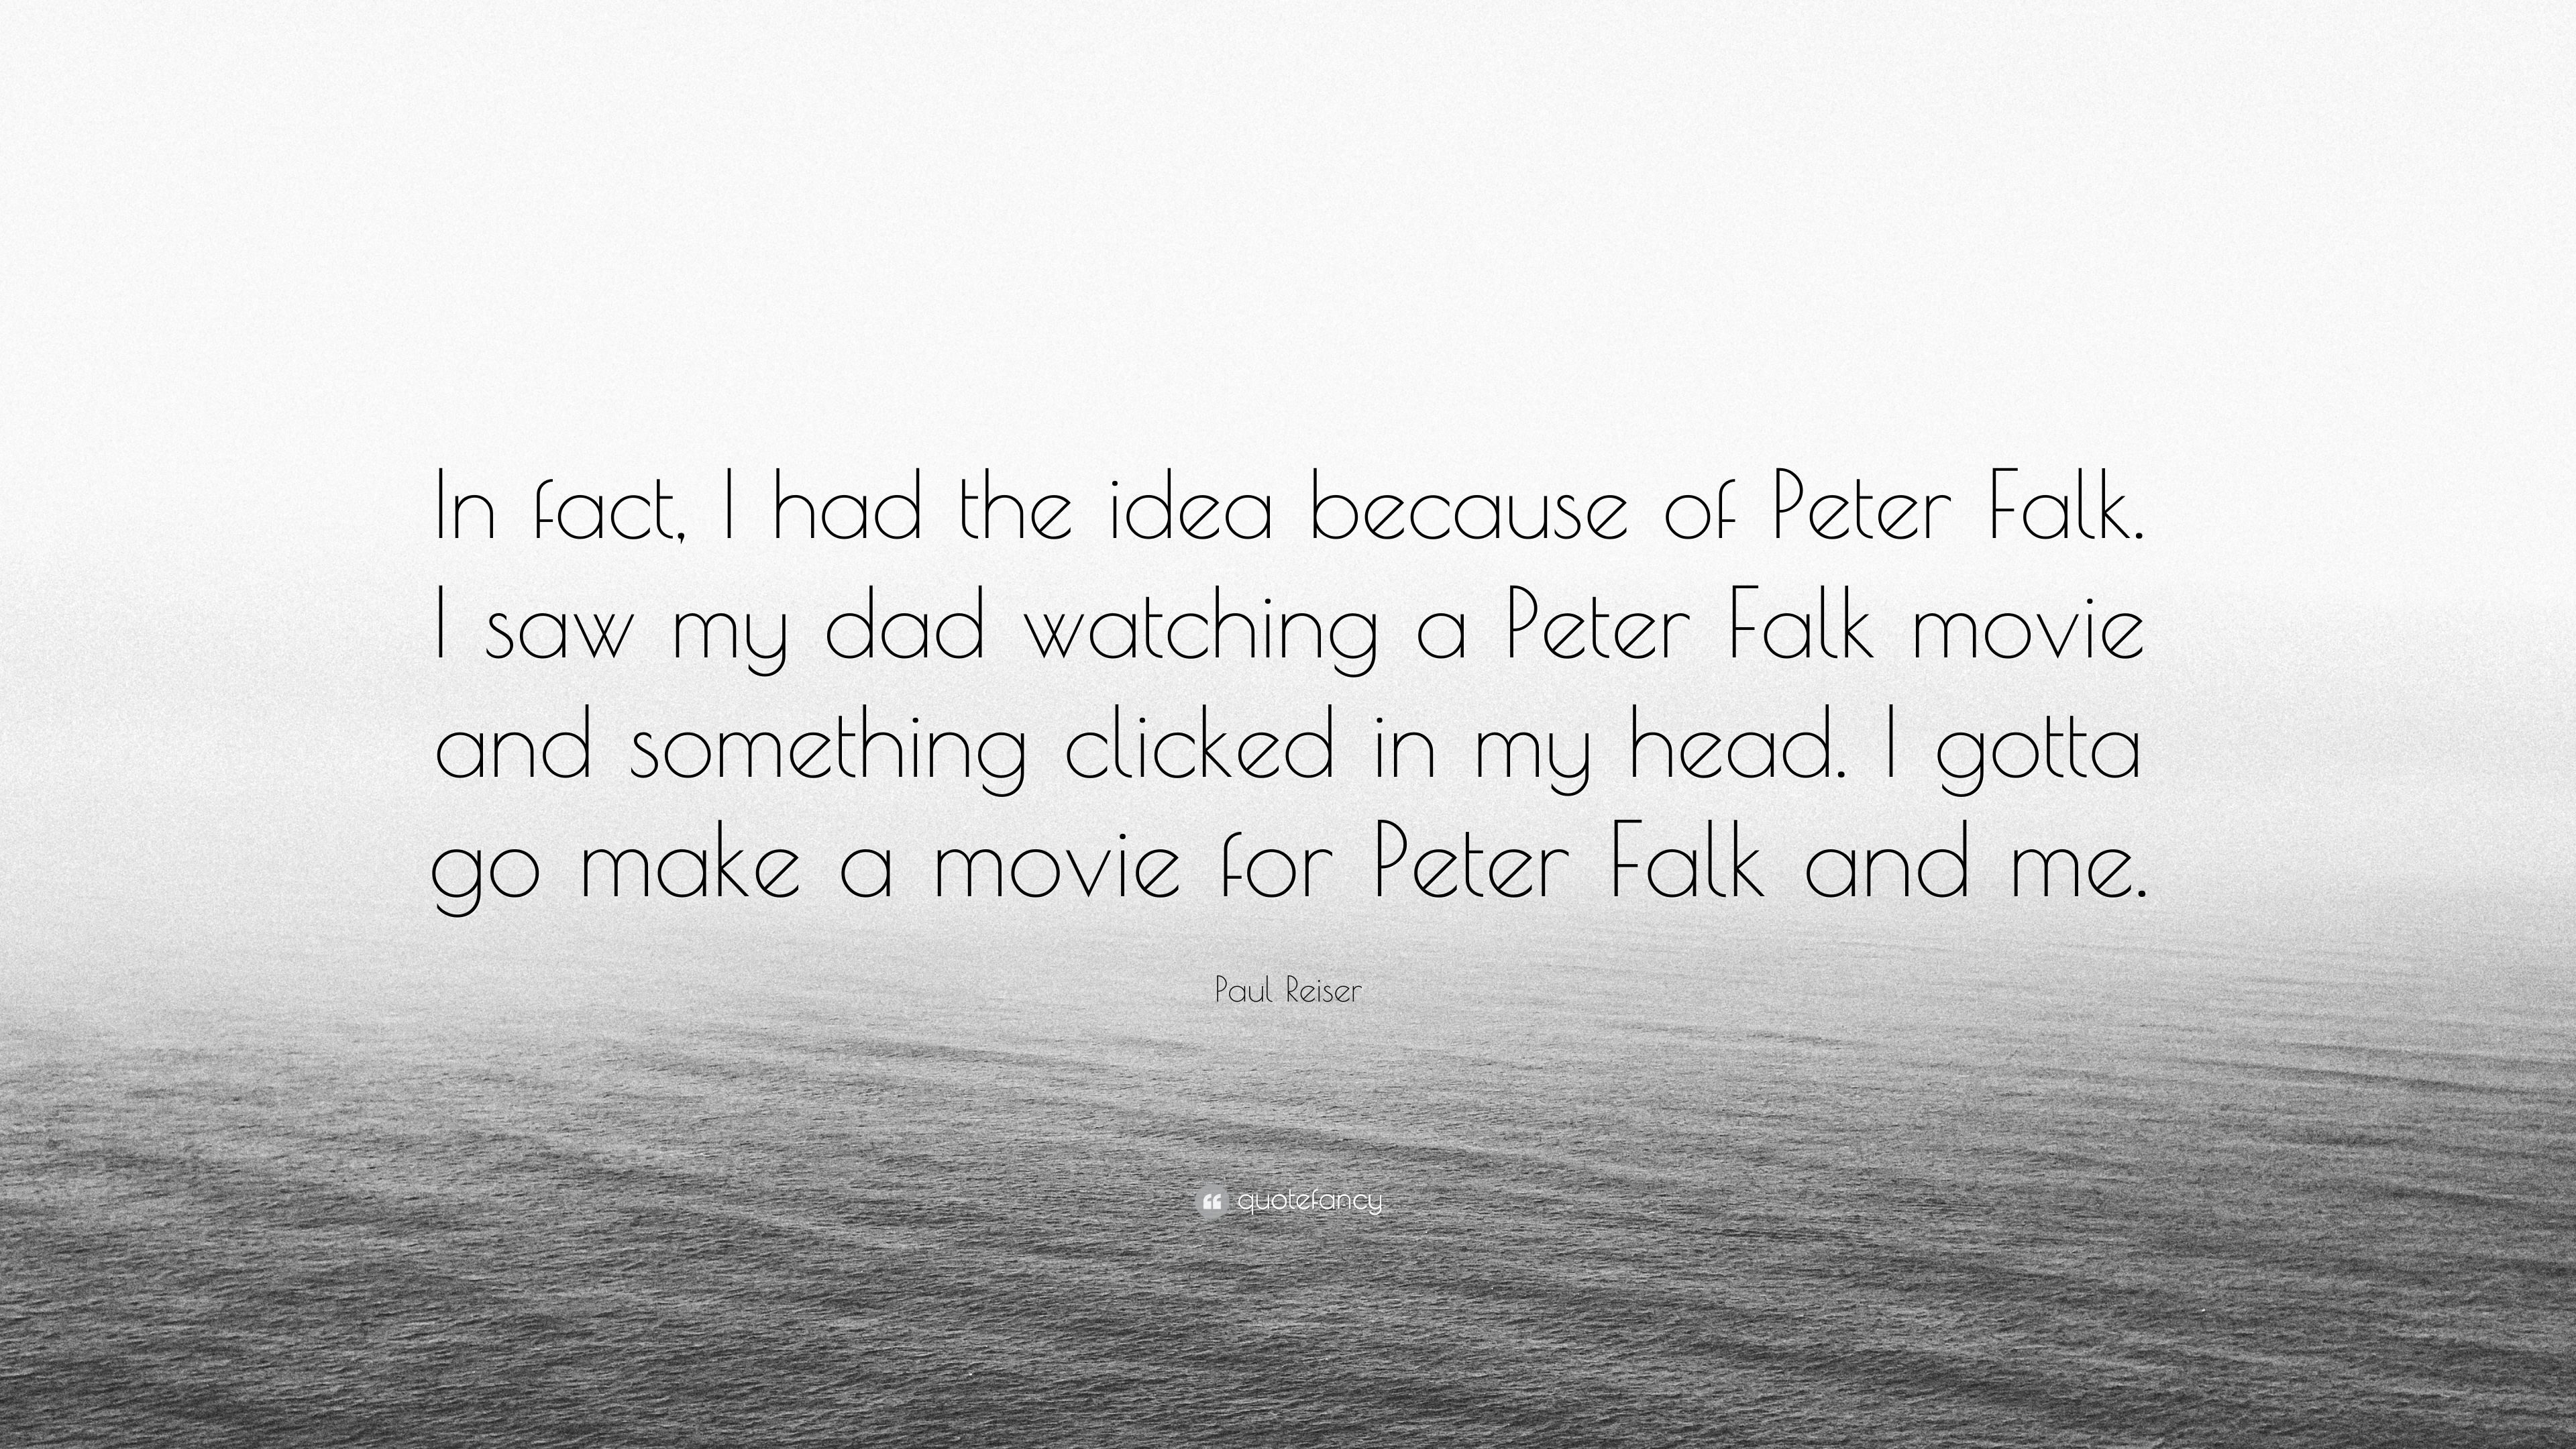 Paul Reiser Quote: “In fact, I had the idea because of Peter Falk